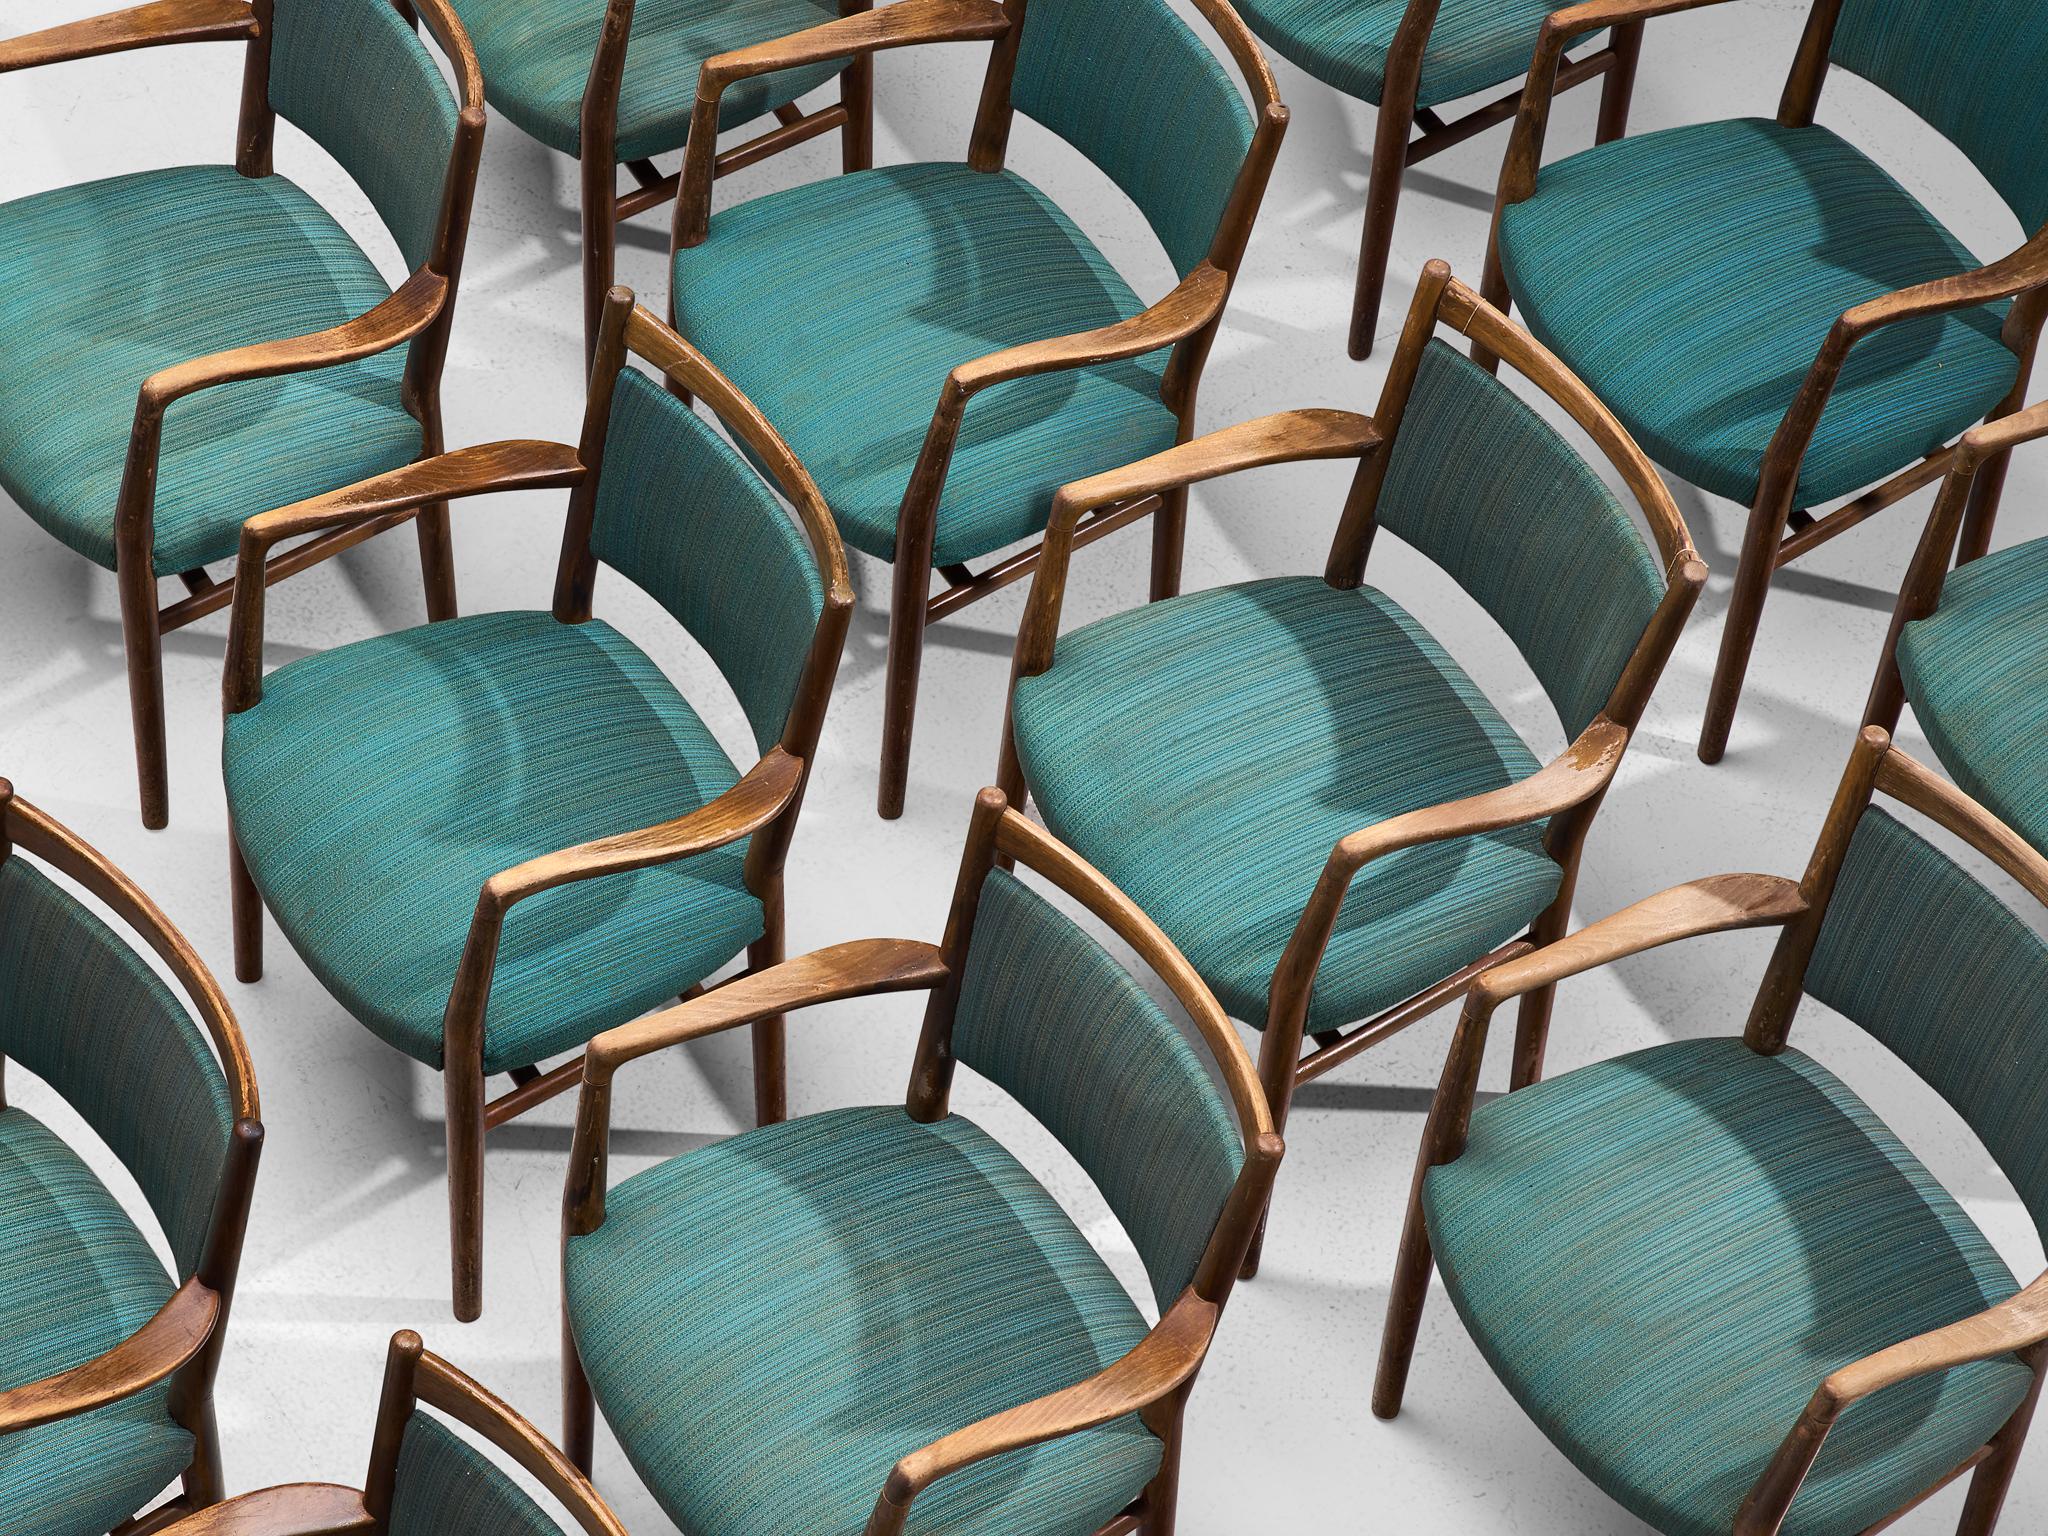 Large Set of Fourteen Danish Armchairs with Turquois Upholstery (Dänisch)